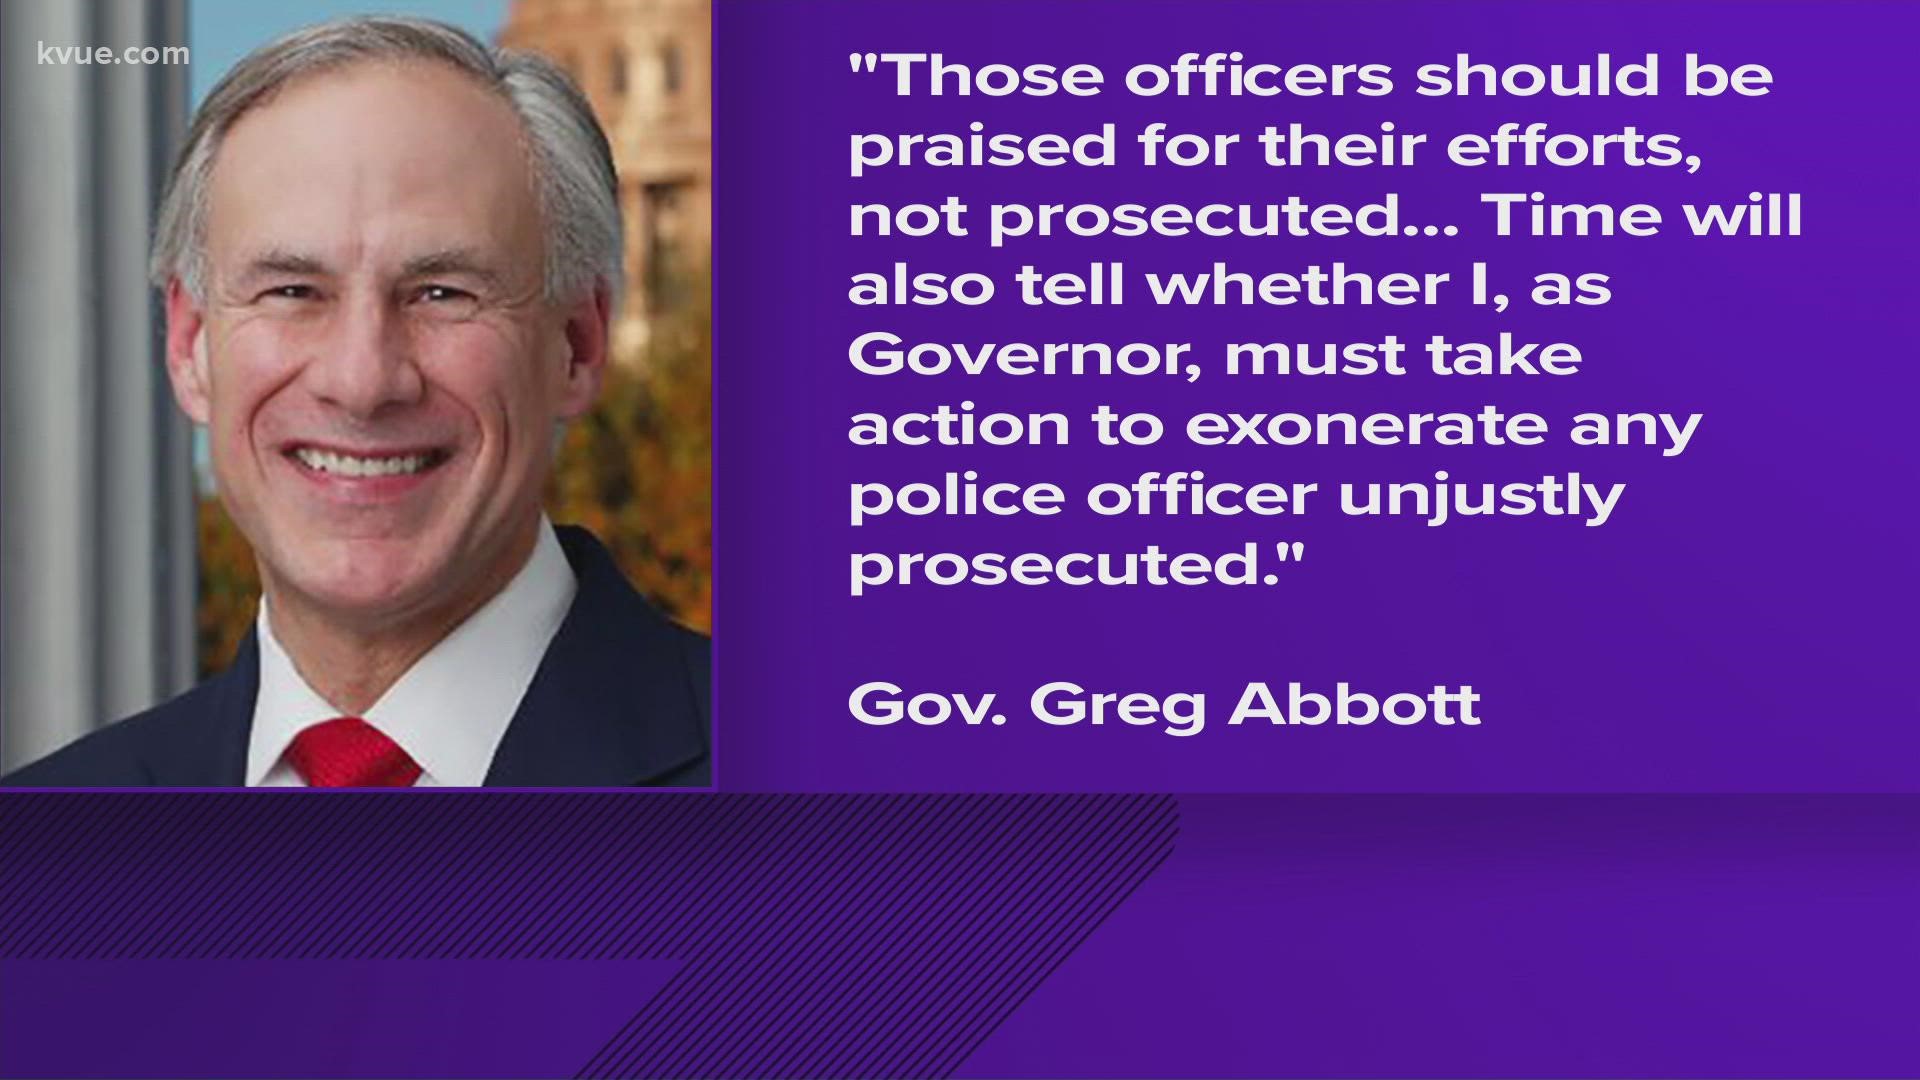 "Time will also tell whether I, as governor, must take action to exonerate any police officer unjustly prosecuted," Abbott said.